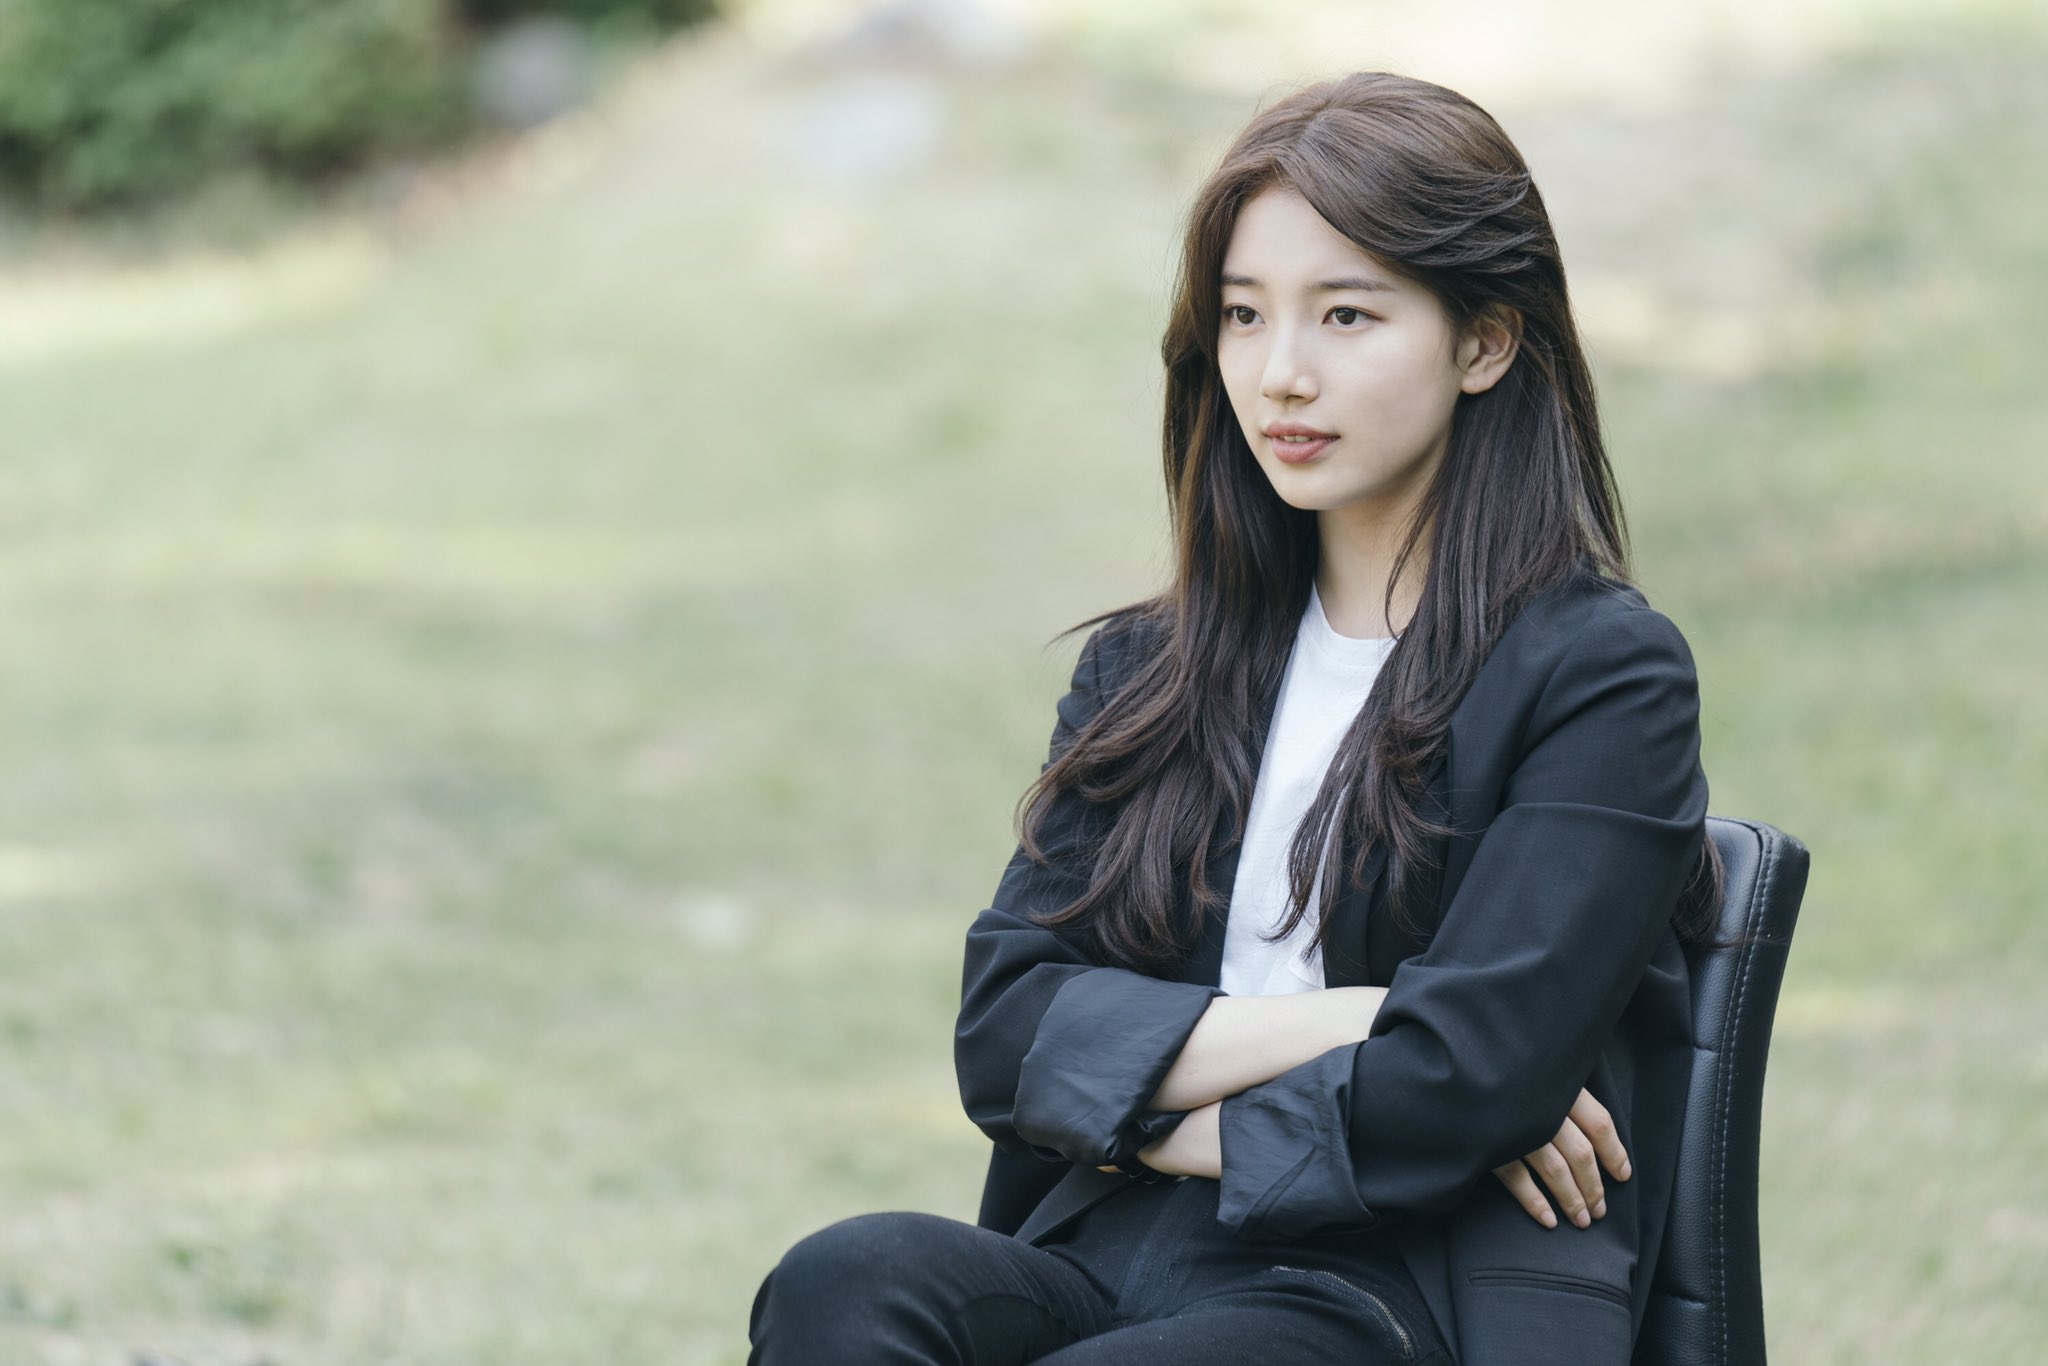 🐰 suzy pics🍑 sur Twitter : "#SUZY x #VAGABOND. EVERYONE PLEASE REMEMBER TO WATCH VAGABOND ITS RELEASE IS TOMORROW AT 10PM KST AND HOUR LATER WILL BE ON NETFLIX!! PLEASE